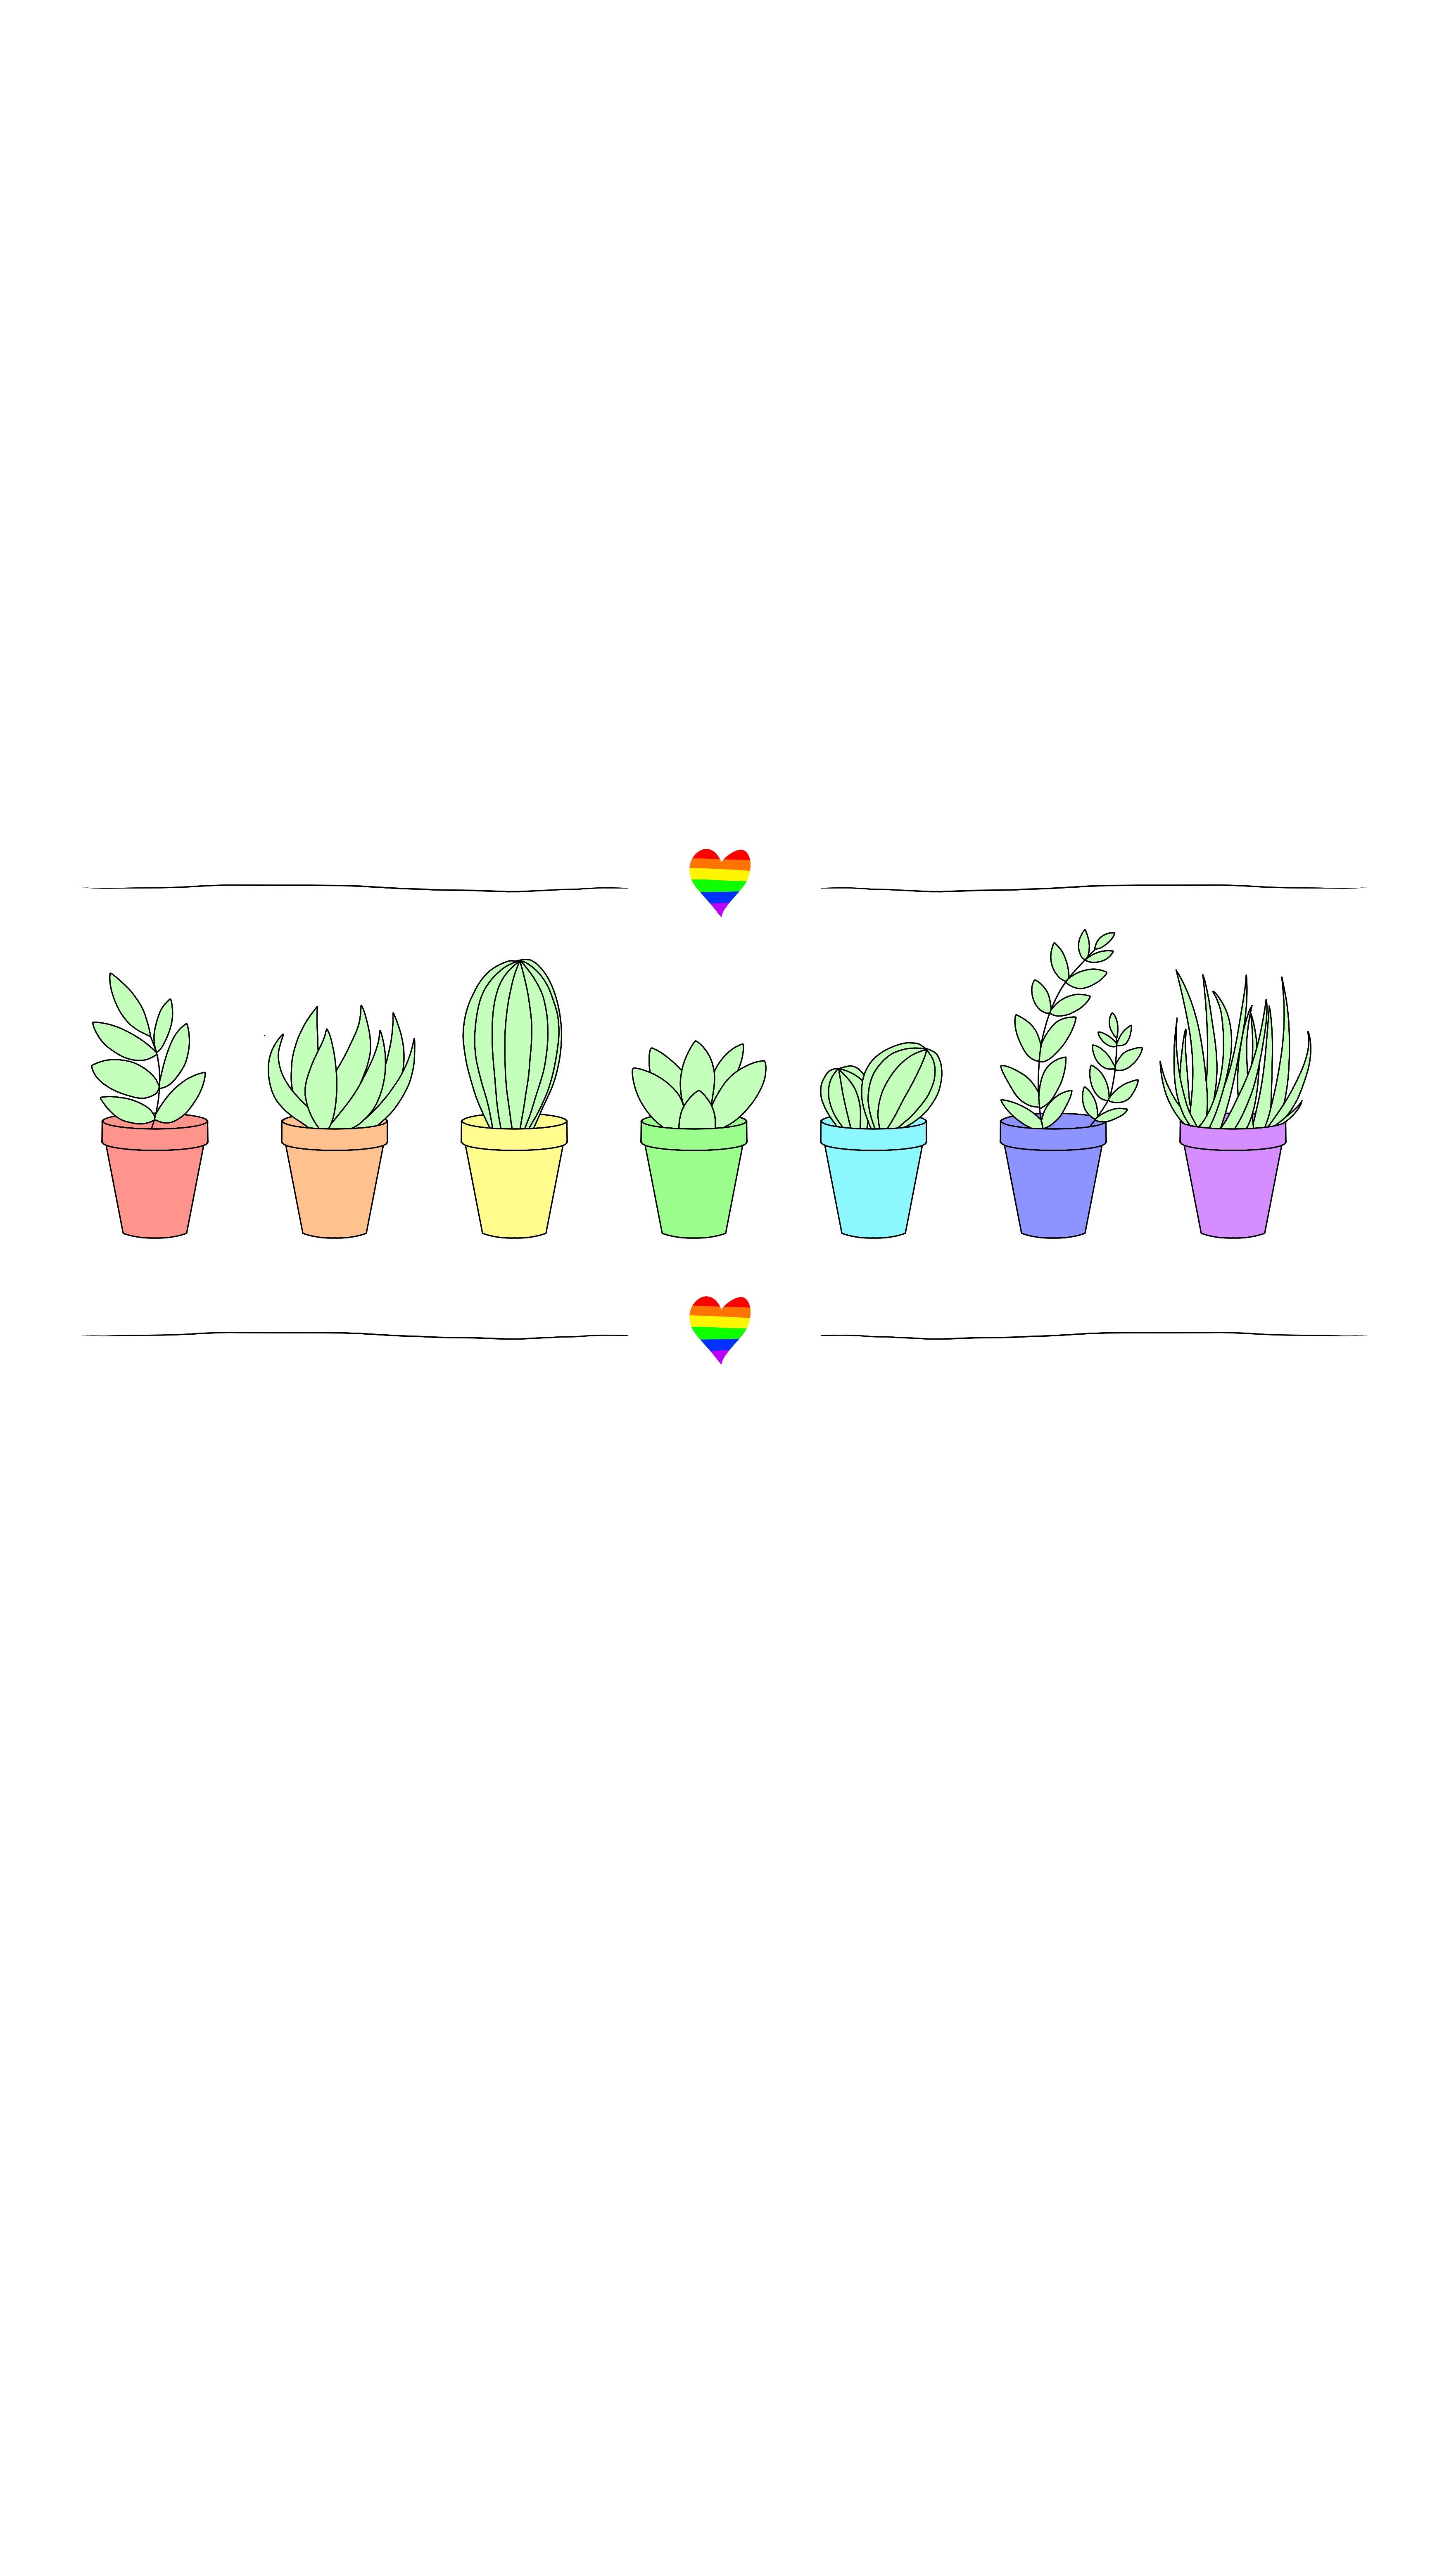 I made a wallpaper for my phone for Pride Month!